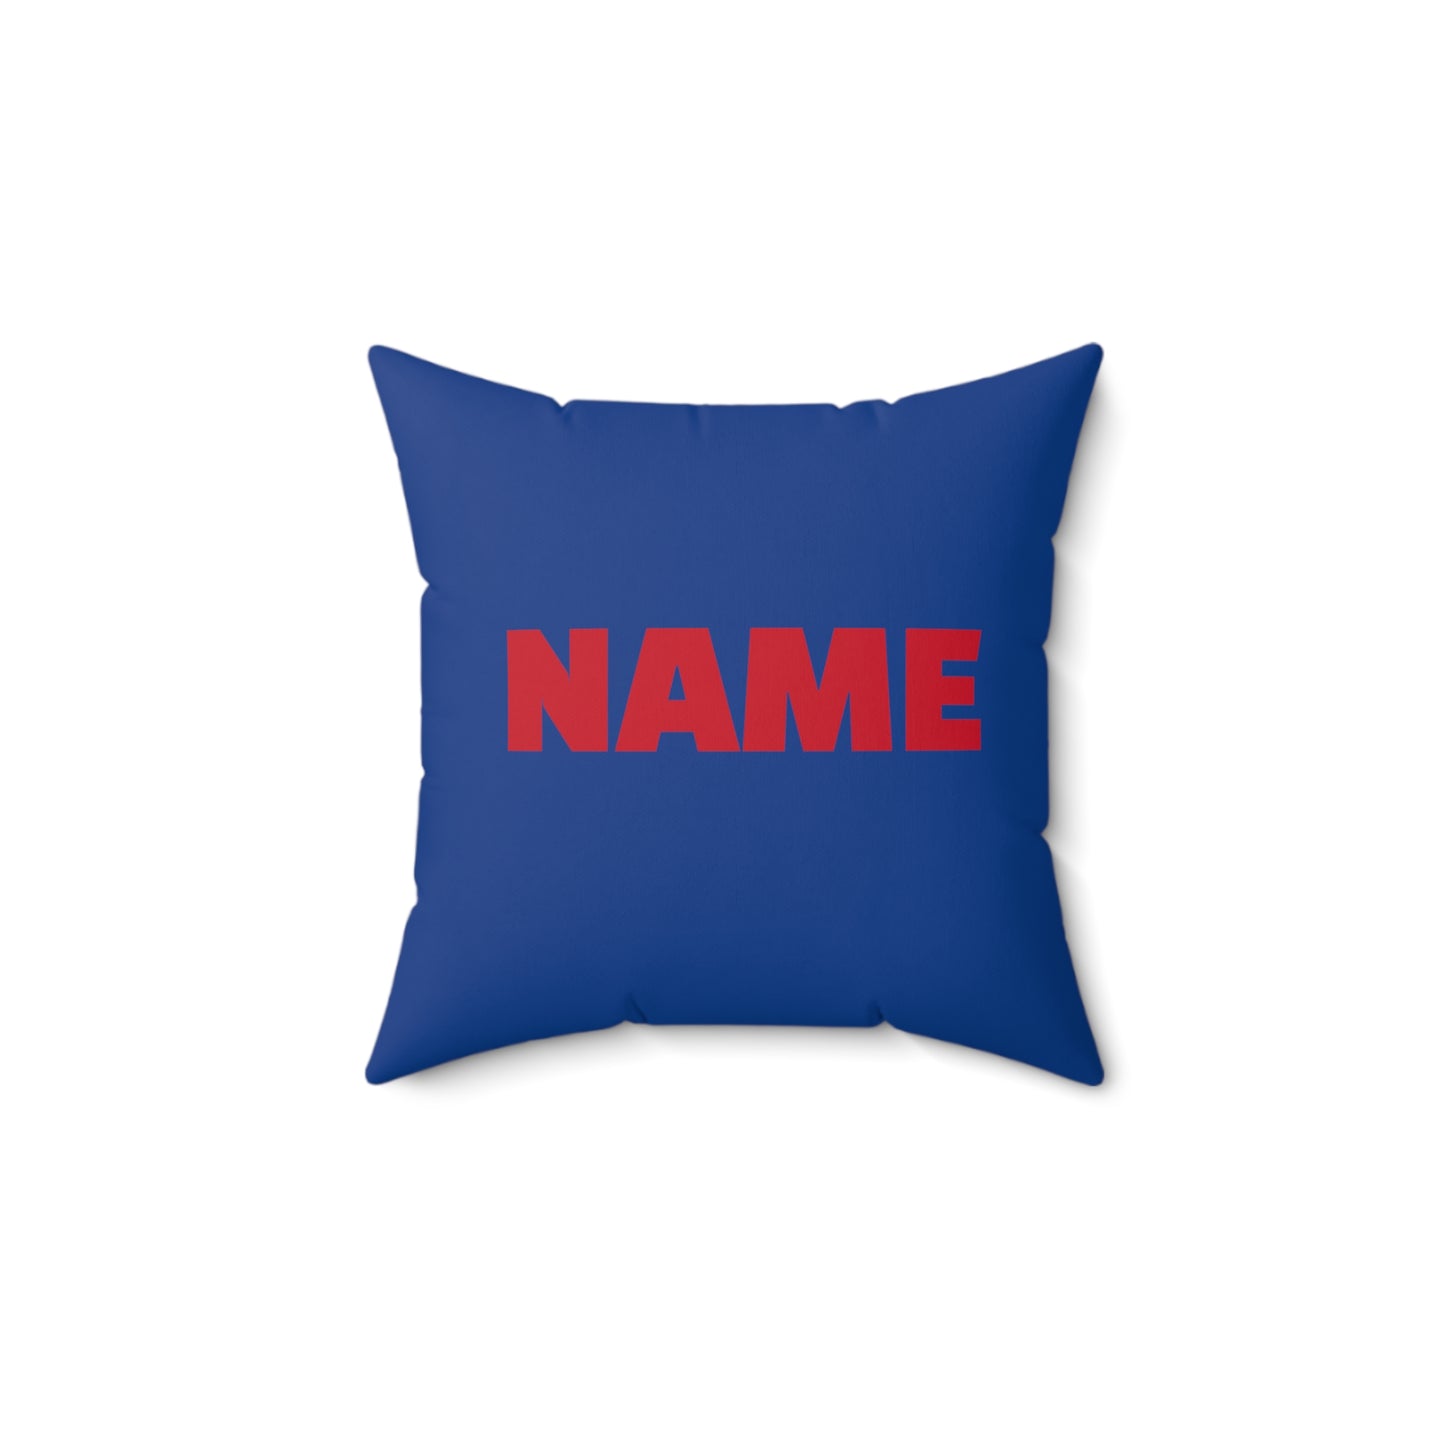 Westfield Football Pillow Personalized with Name